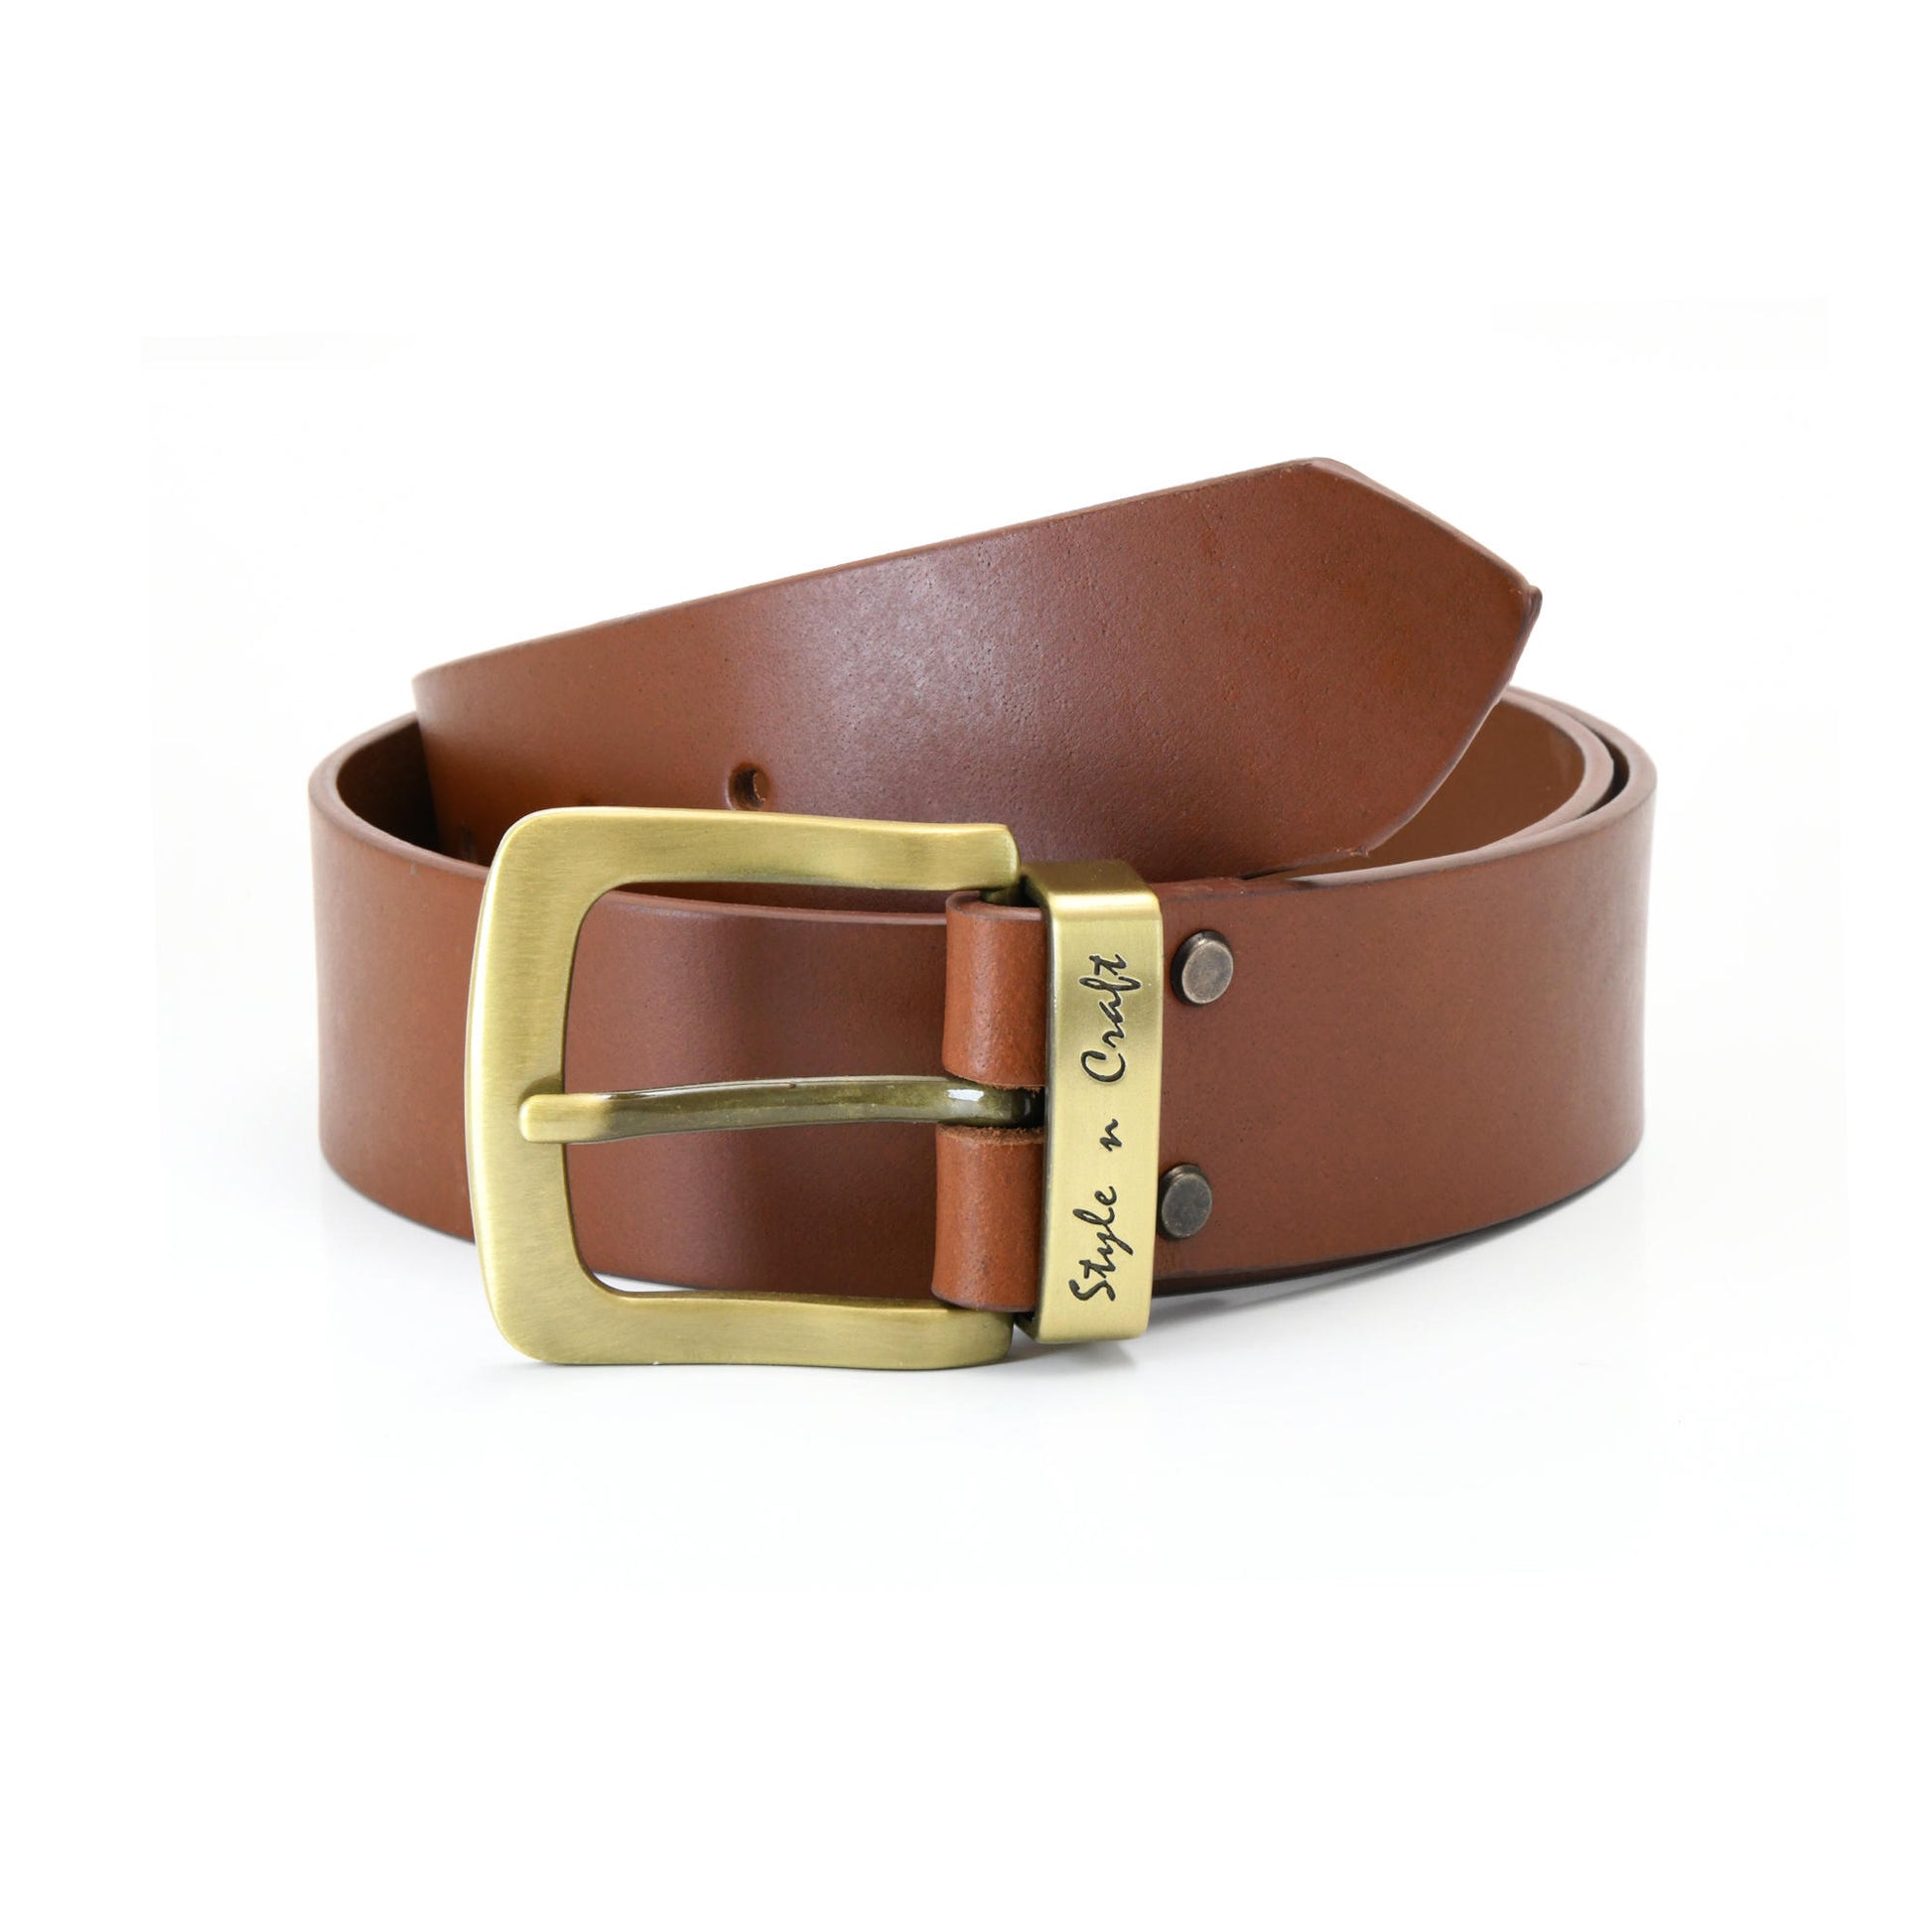 Heavy Duty Full Grain Leather Belt - 1.5 Inch Wide - One Piece Thick Leather  - Made In USA (Brown, 30) at  Men's Clothing store